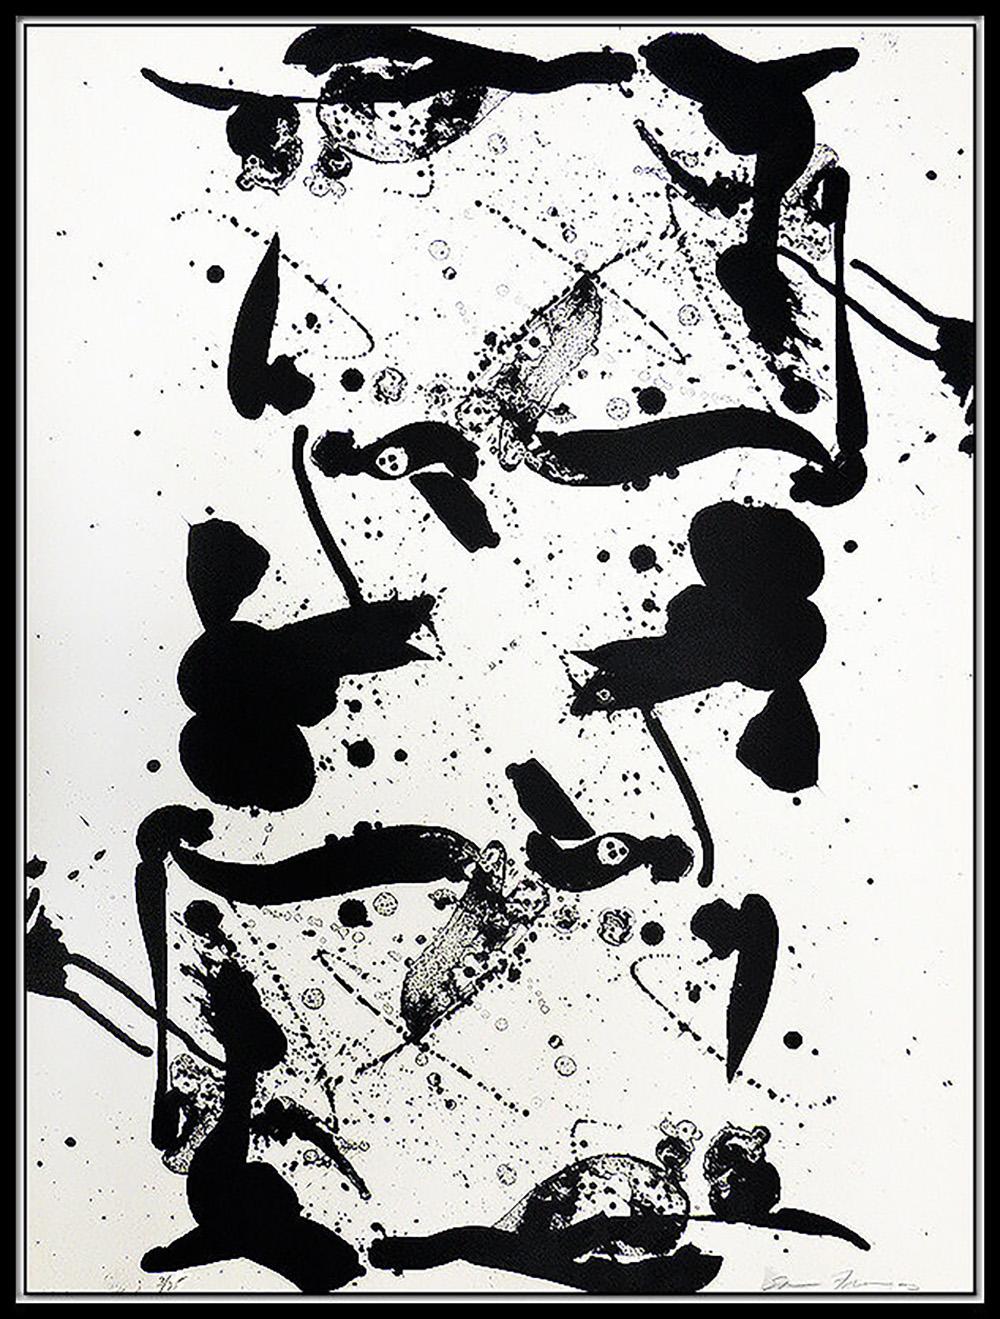 Sam Francis Hand Signed and Numbered Lithograph, Custom Framed and listed with the Submit Best Offer option

Accepting Offers Now:  Up for sale here we have a Large, Authentic and extremely rare (only 75 in the edition), Color Lithograph on art